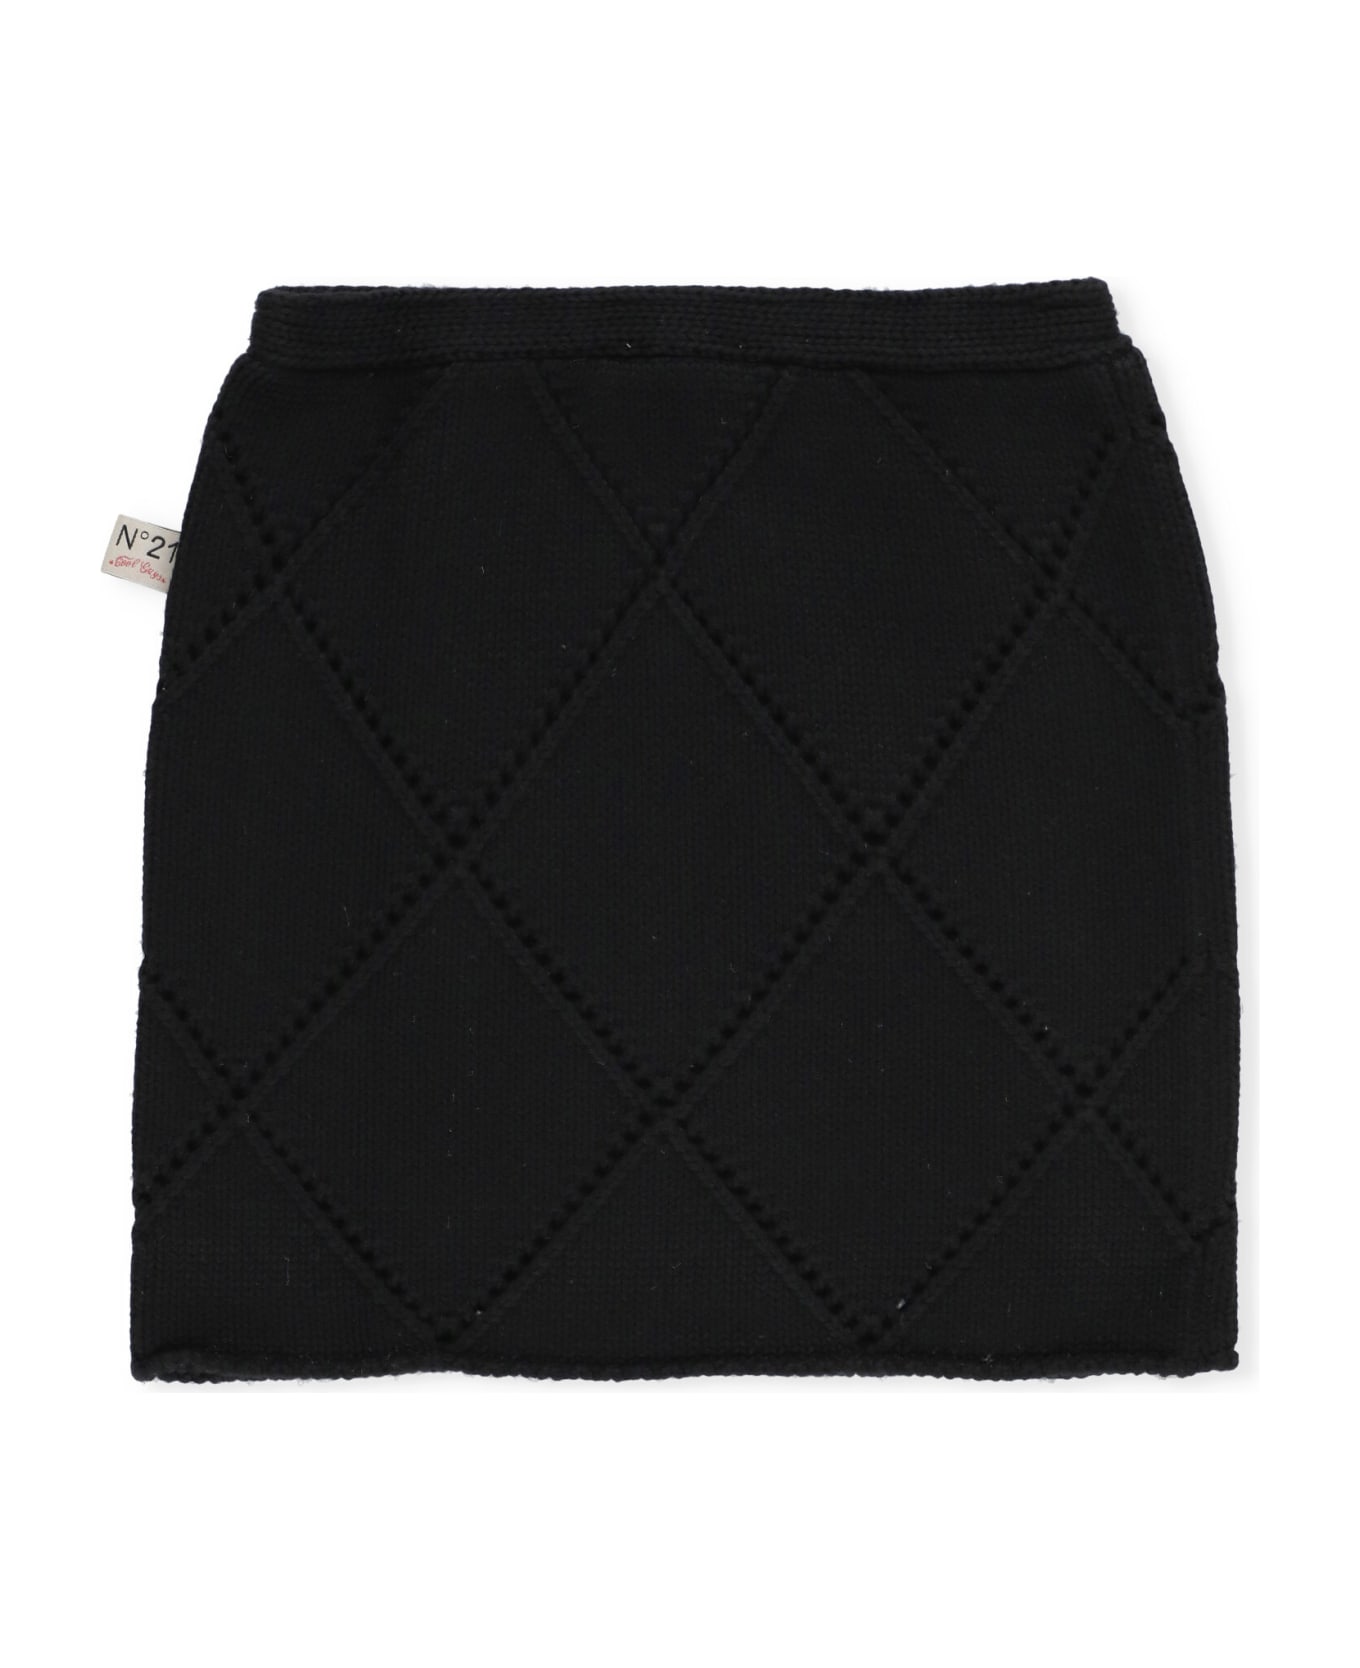 N.21 Wool And Cotton Skirt - Black ボトムス